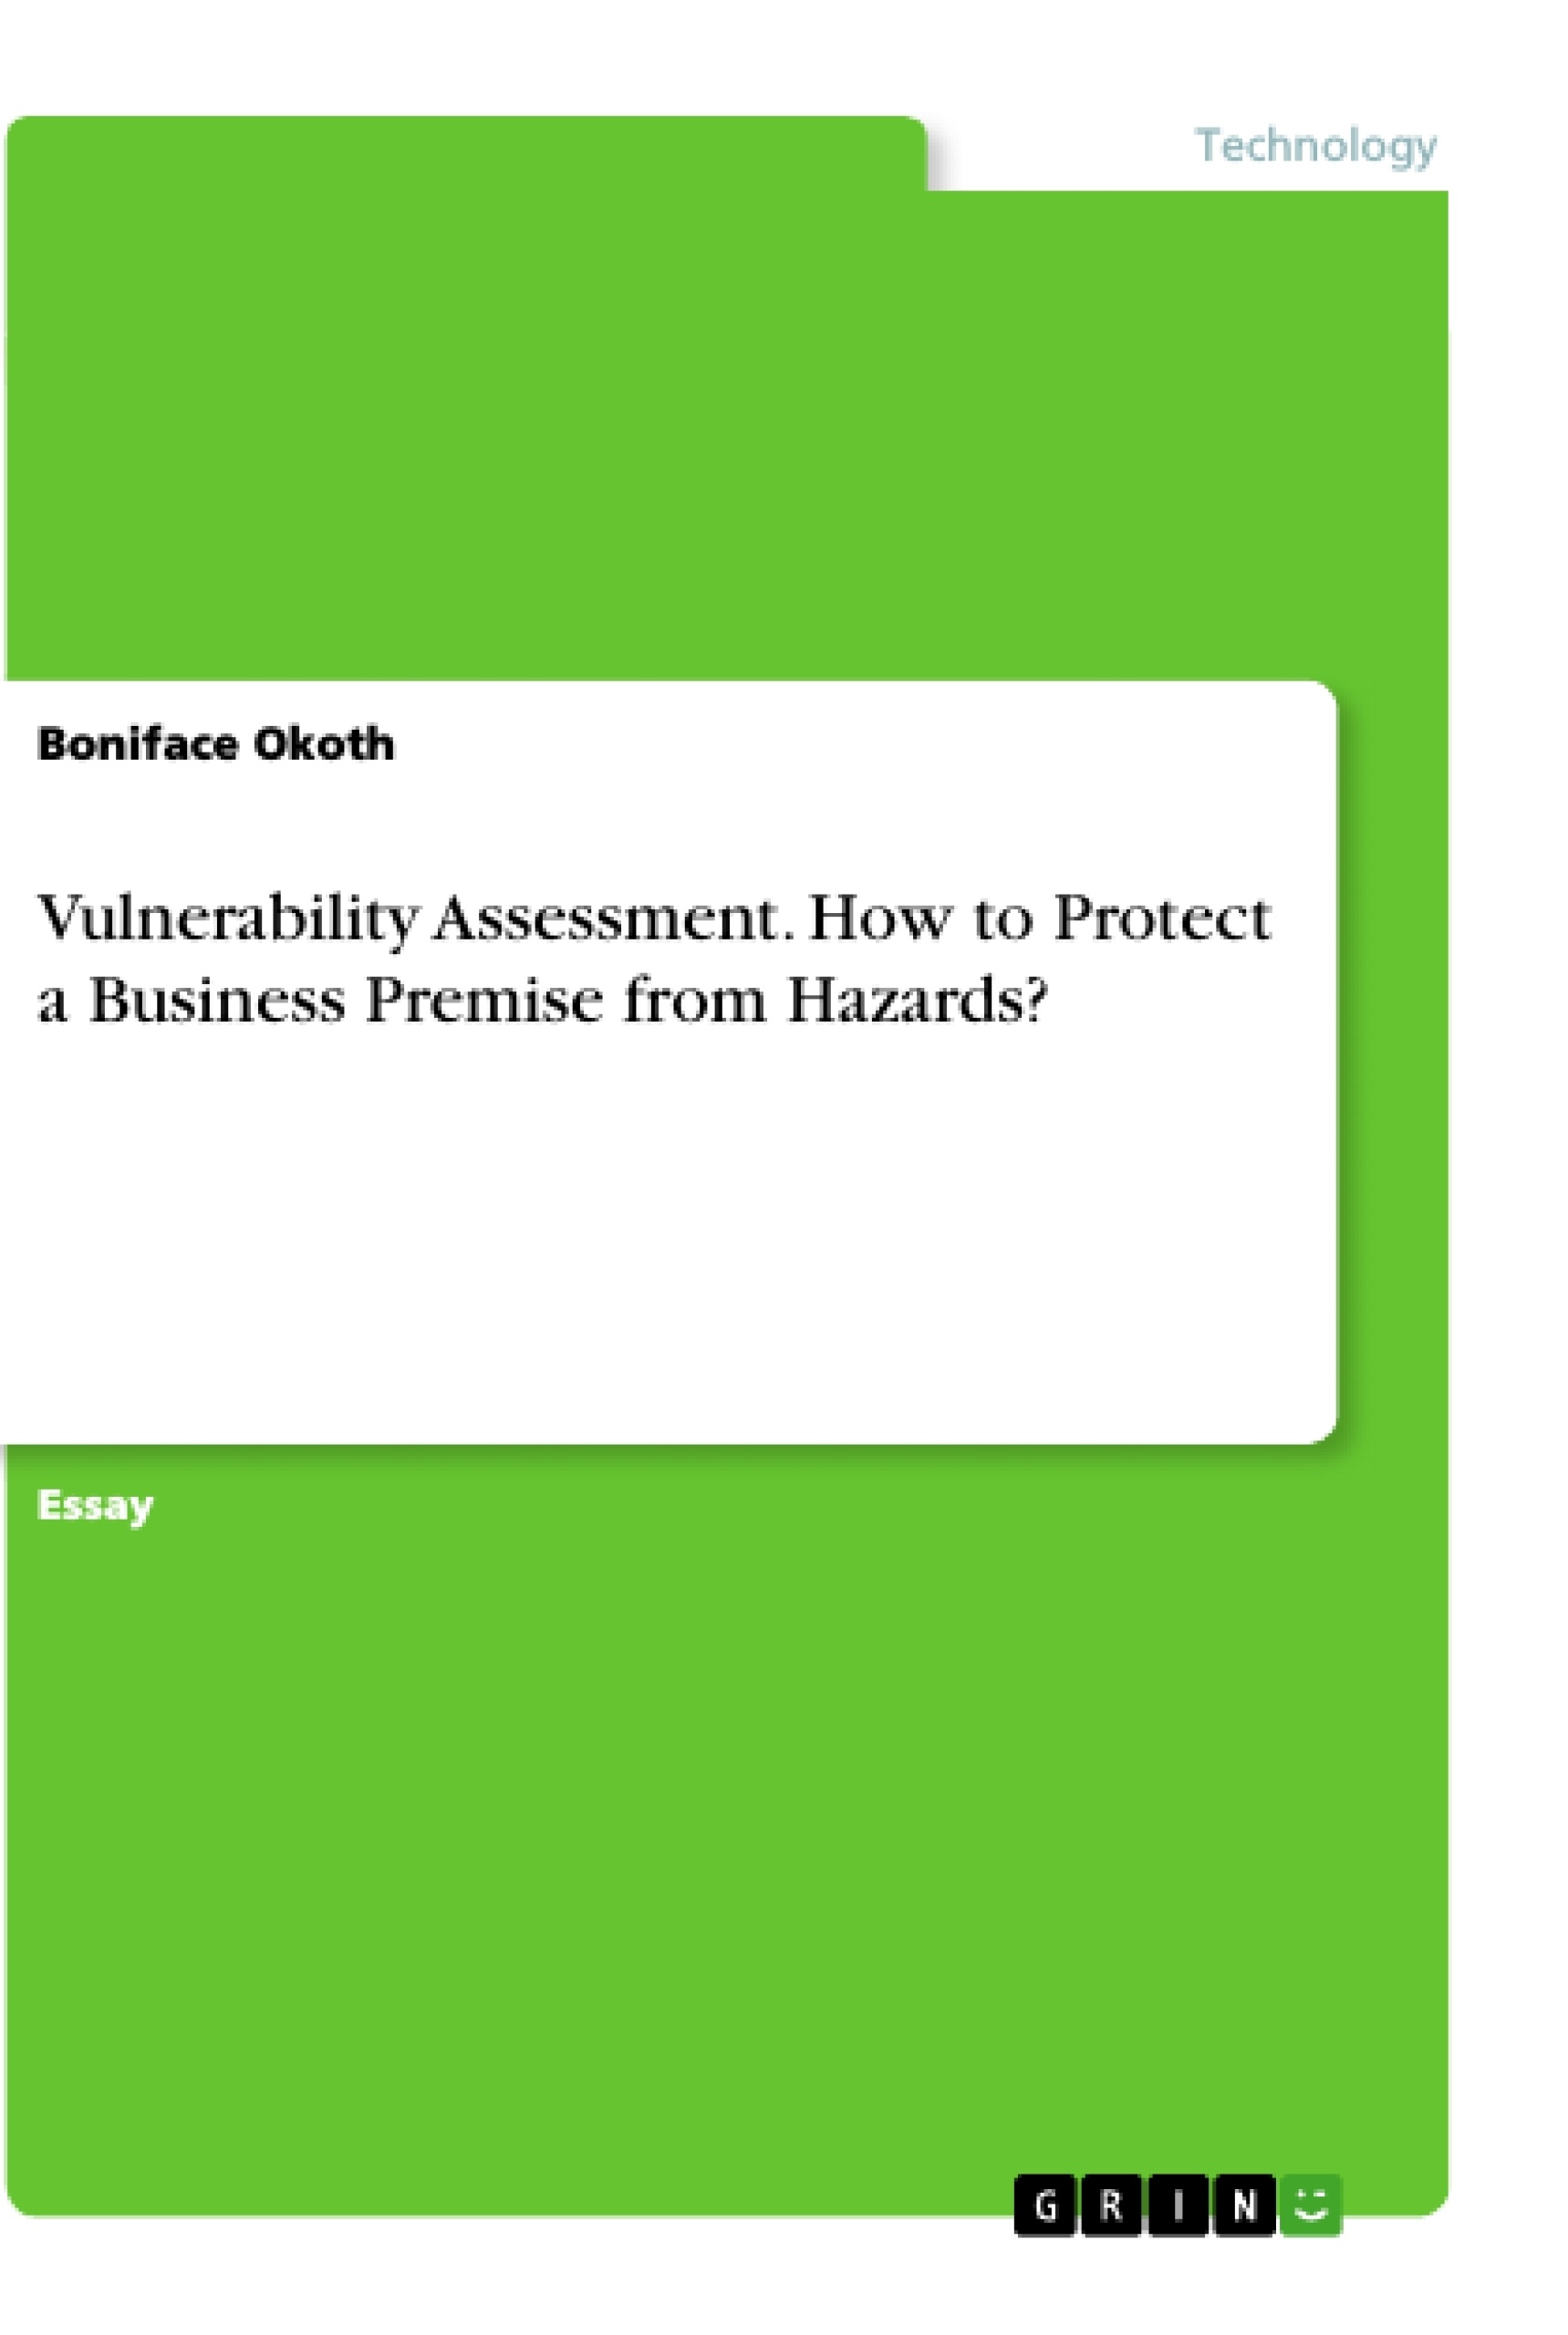 Titre: Vulnerability Assessment. How to Protect a Business Premise from Hazards?